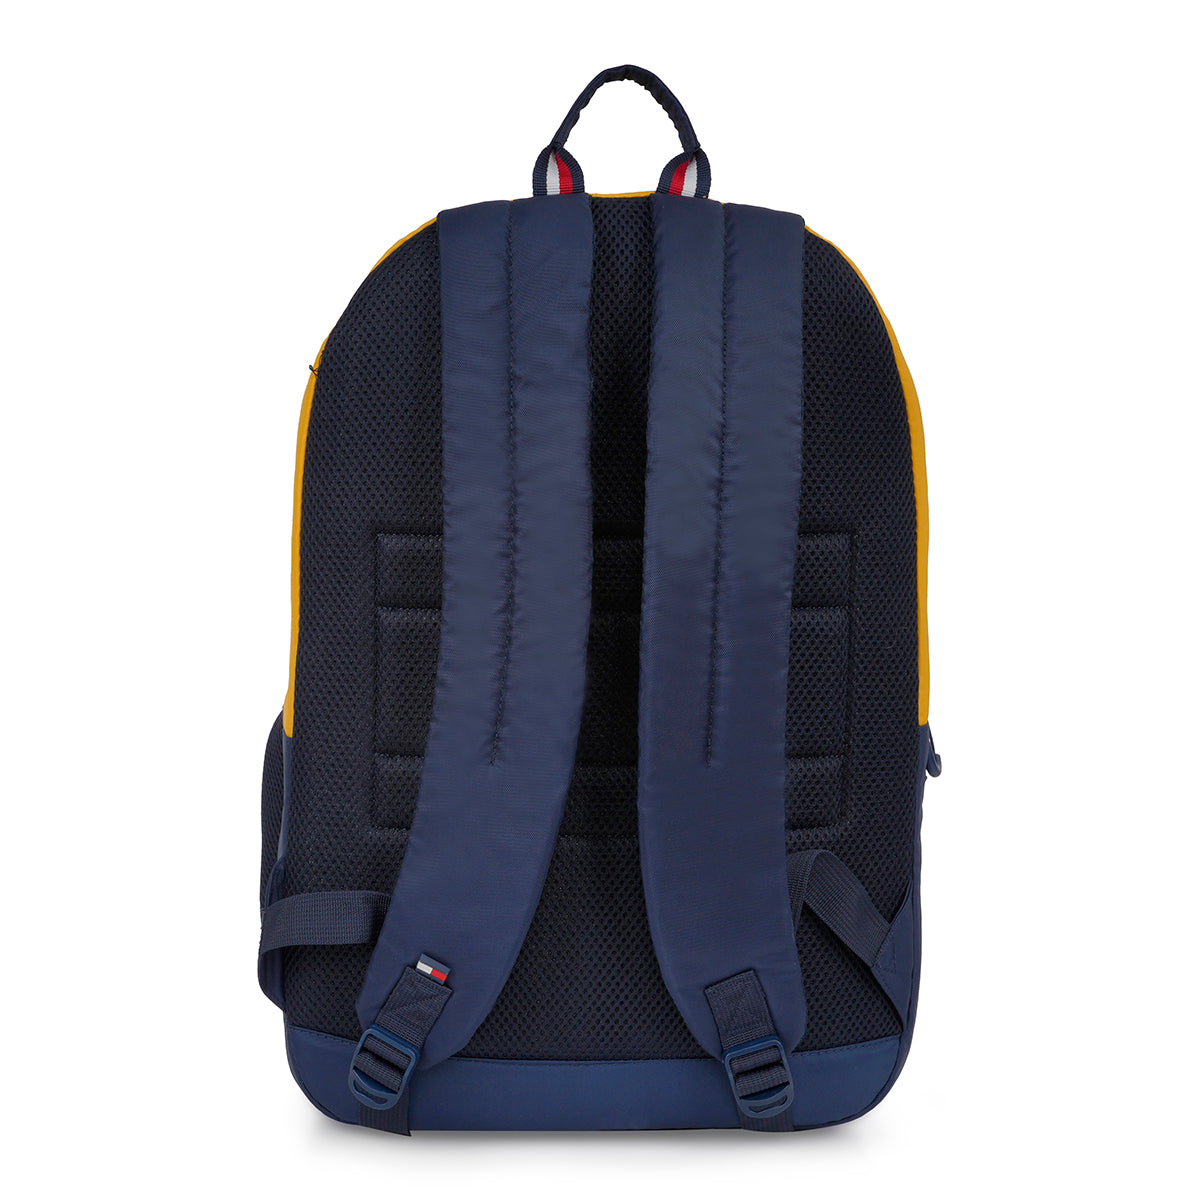 Tommy Hilfiger Kavin Back to School Backpack Yellow